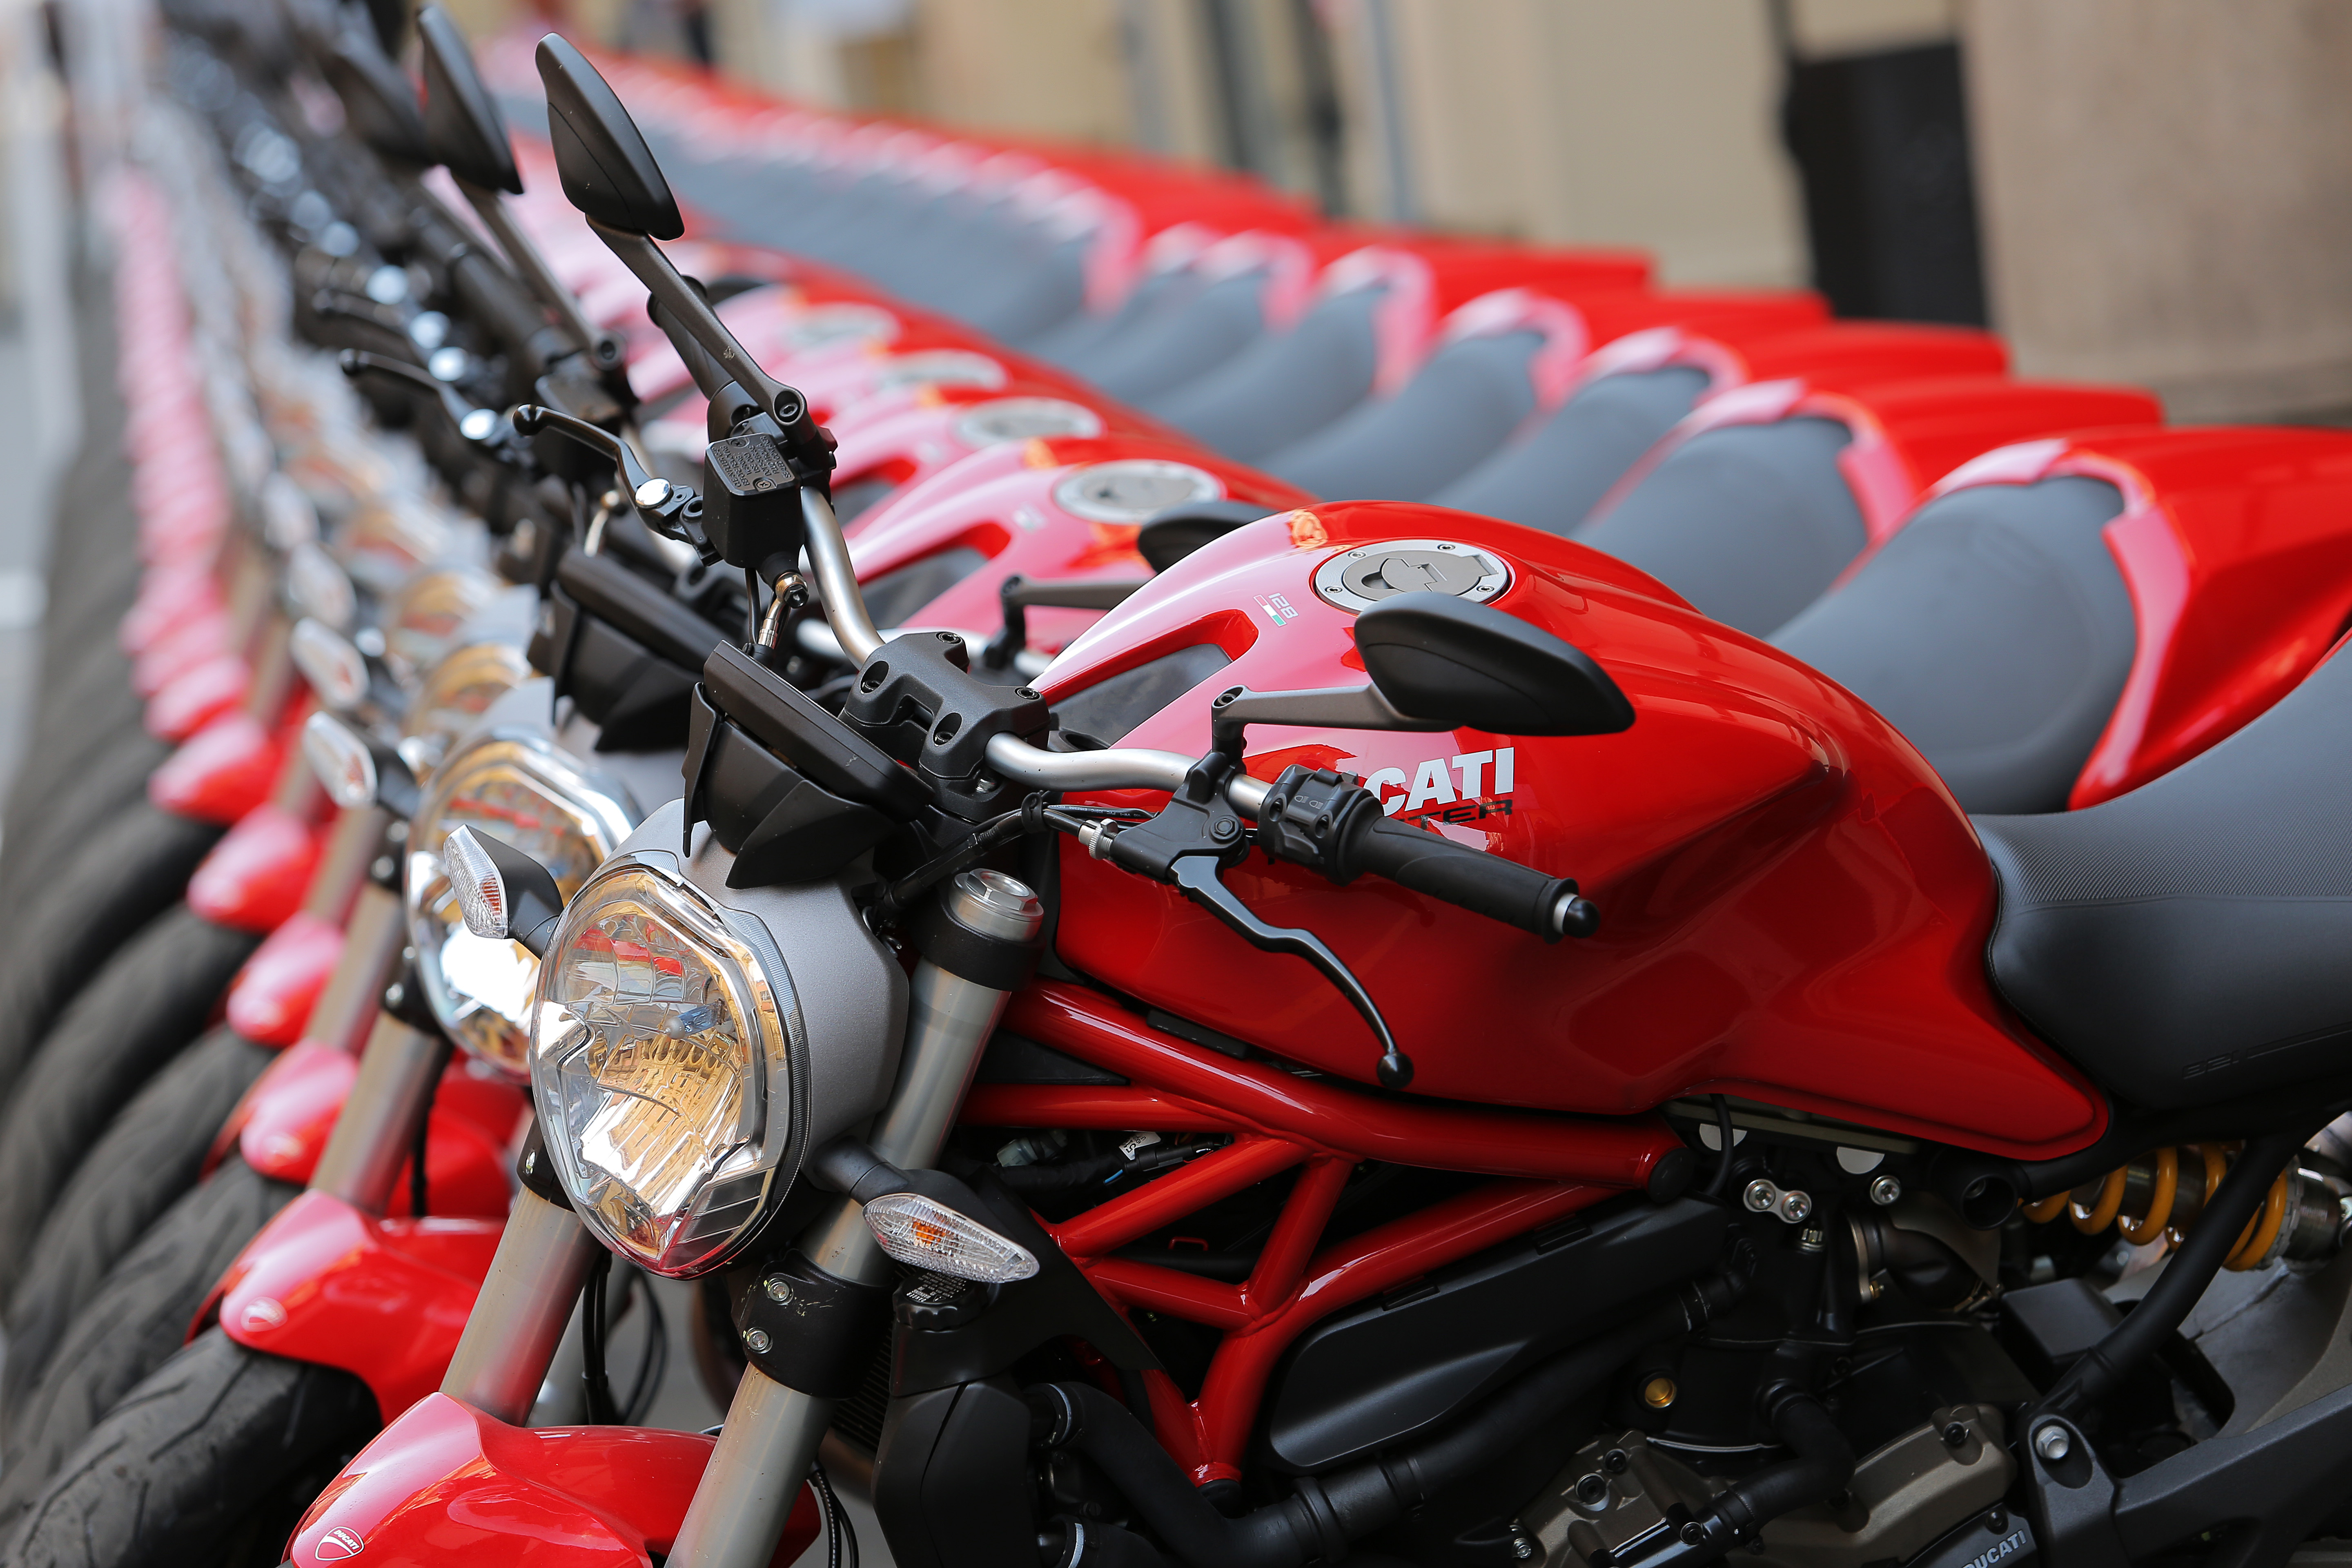 First ride: Ducati Monster 821 review